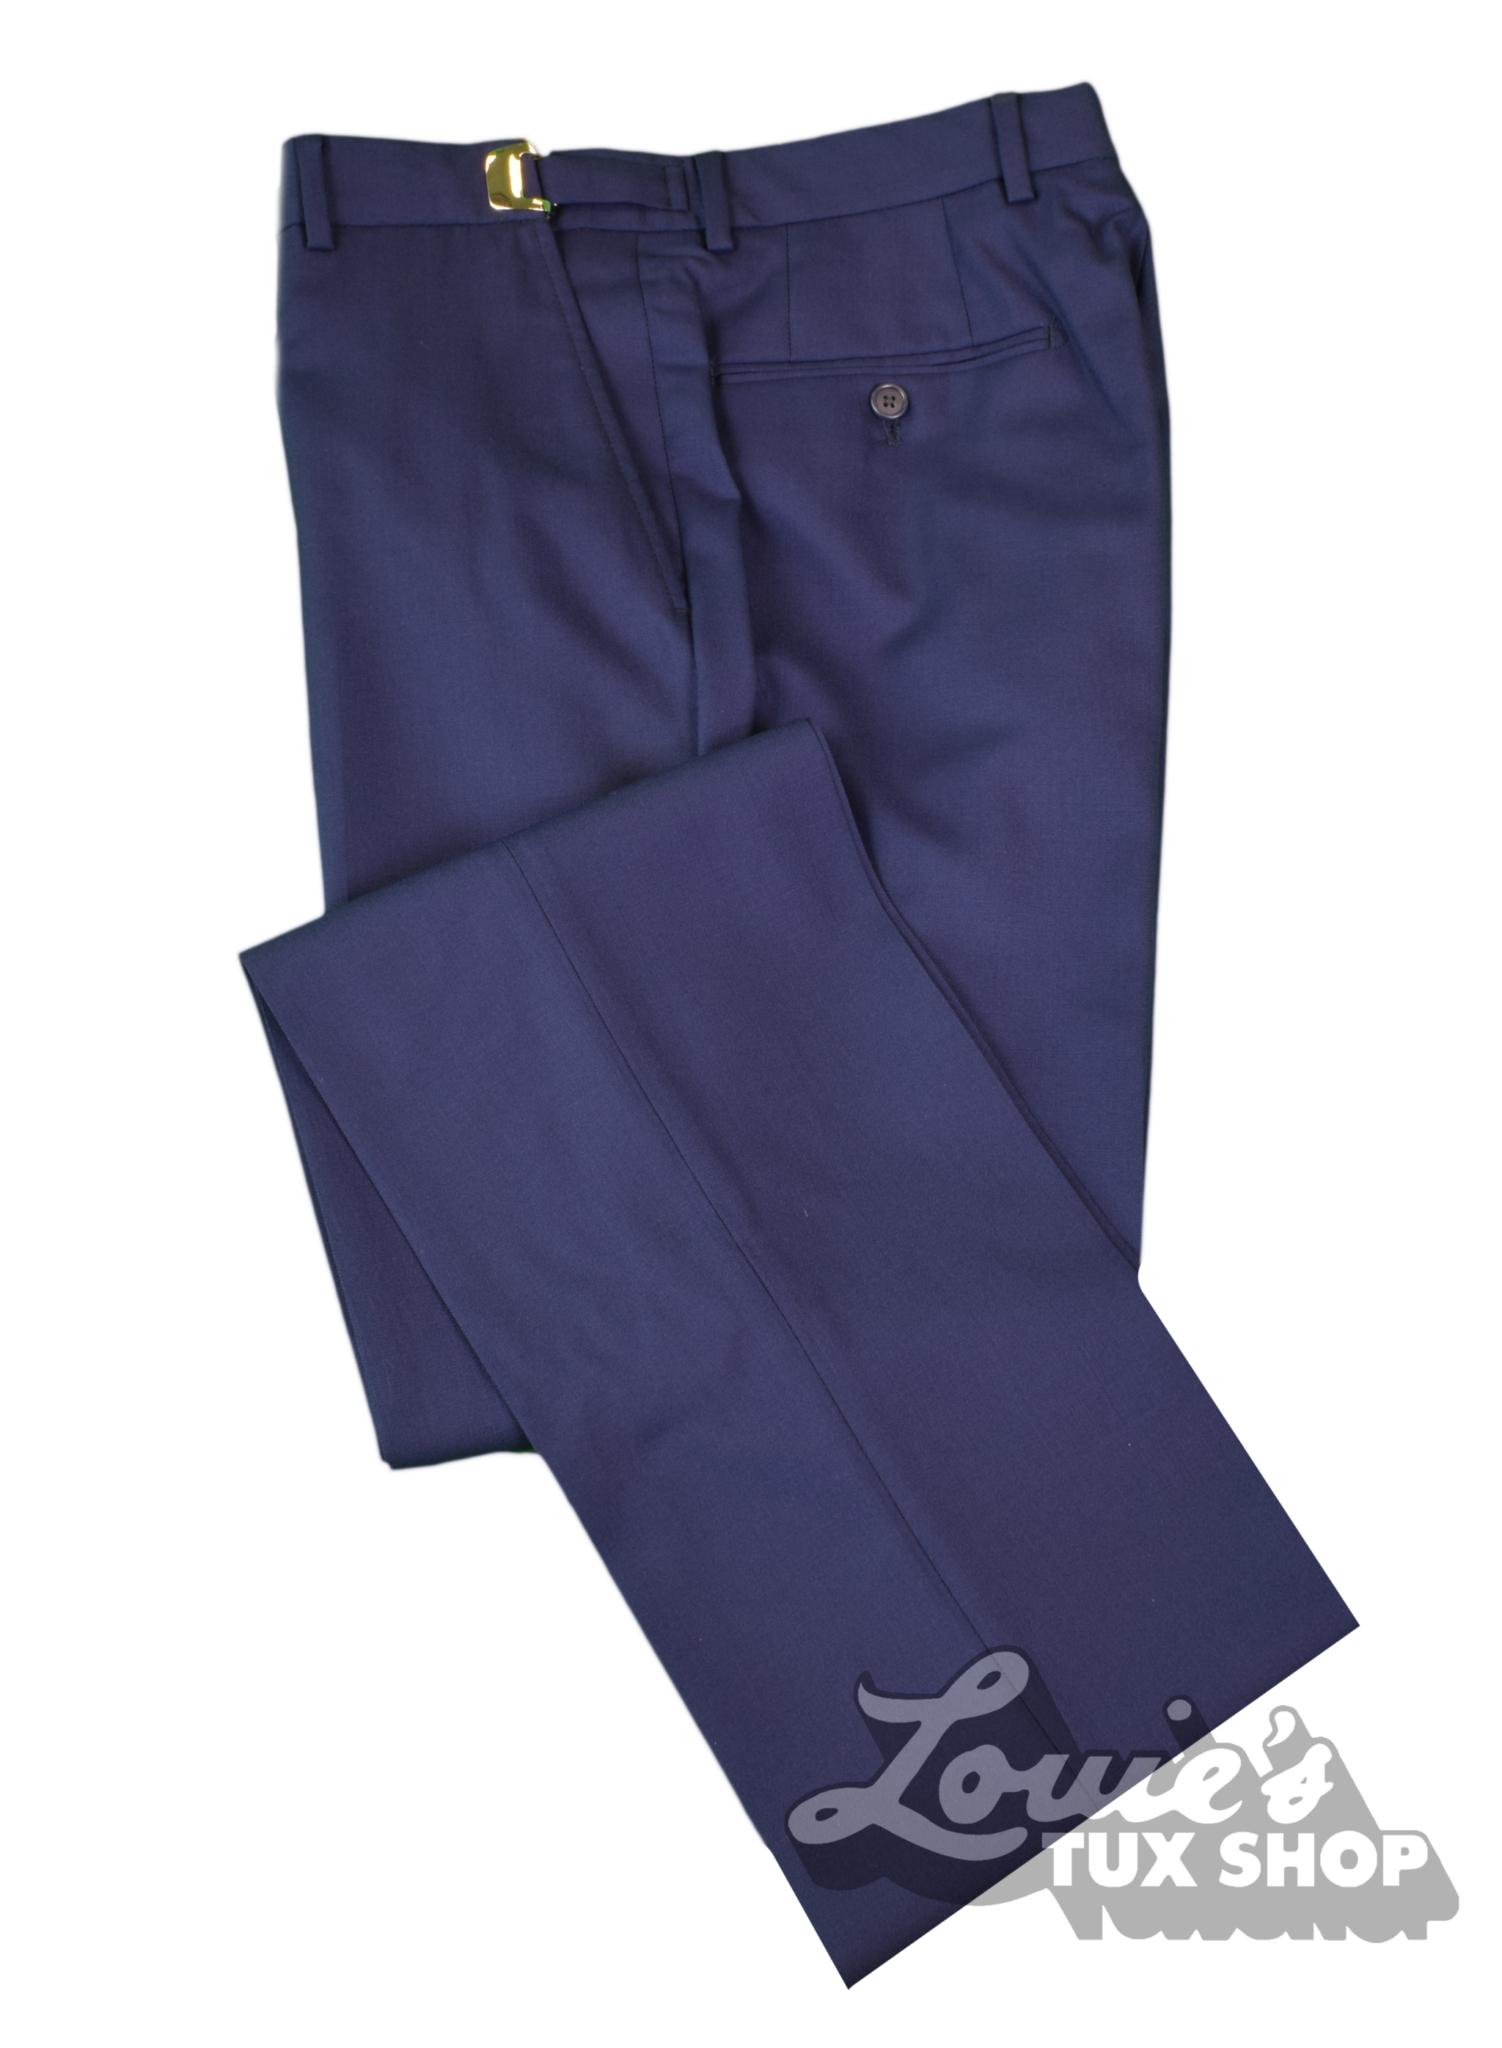 Mens Navy Blue Color Casual Track Pants for Sports Wear